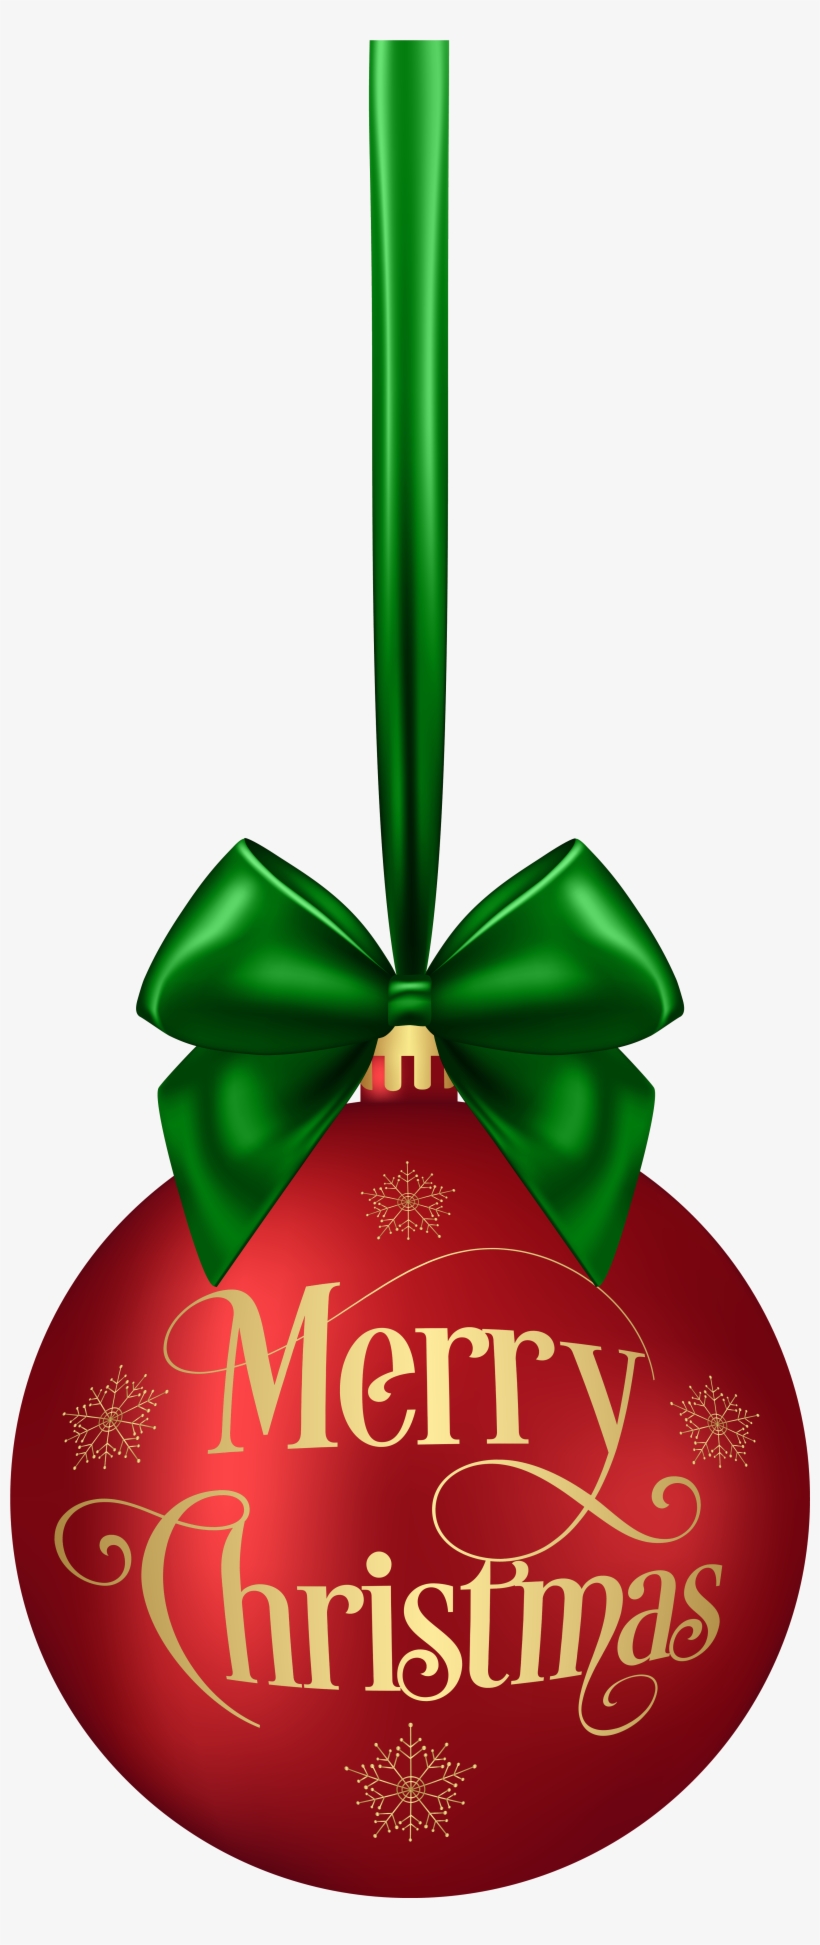 Merry Christmas Ball Red Clip Art Deco Image - Gift Wrapping, transparent png #9534851